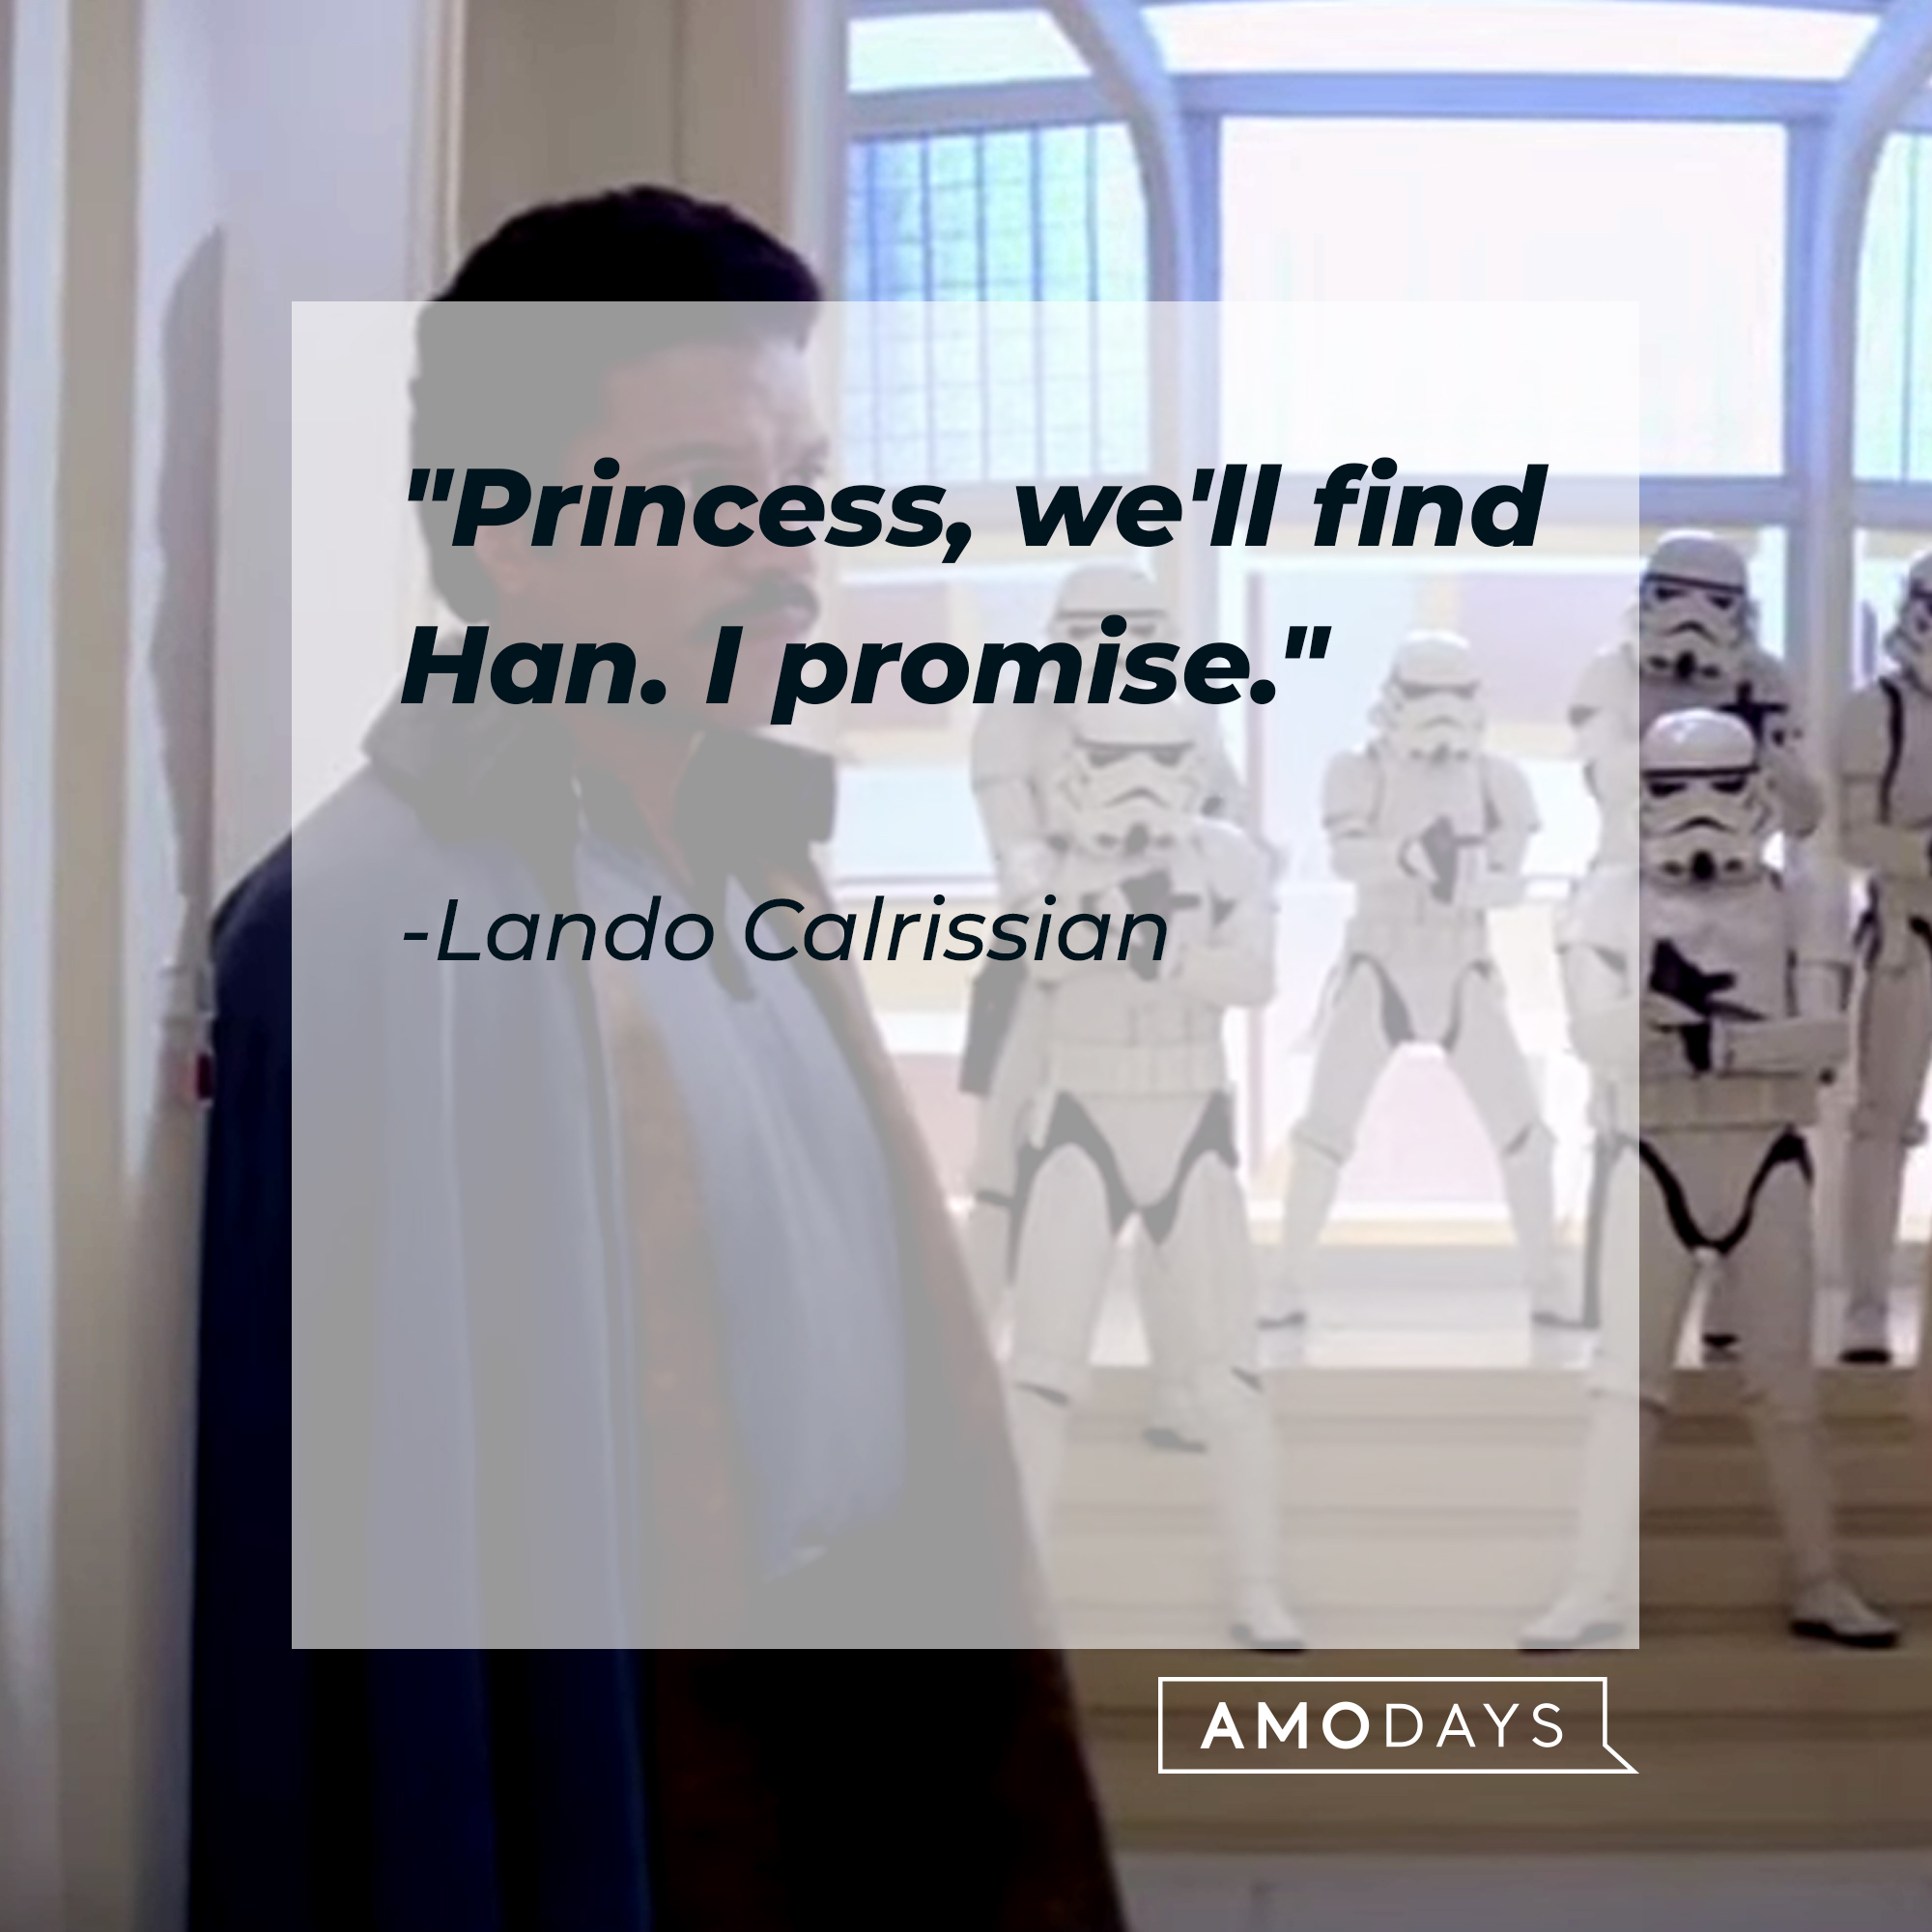 Lando Calrissian's quote, "Princess, we'll find Han. I promise." | Source: Facebook/StarWars